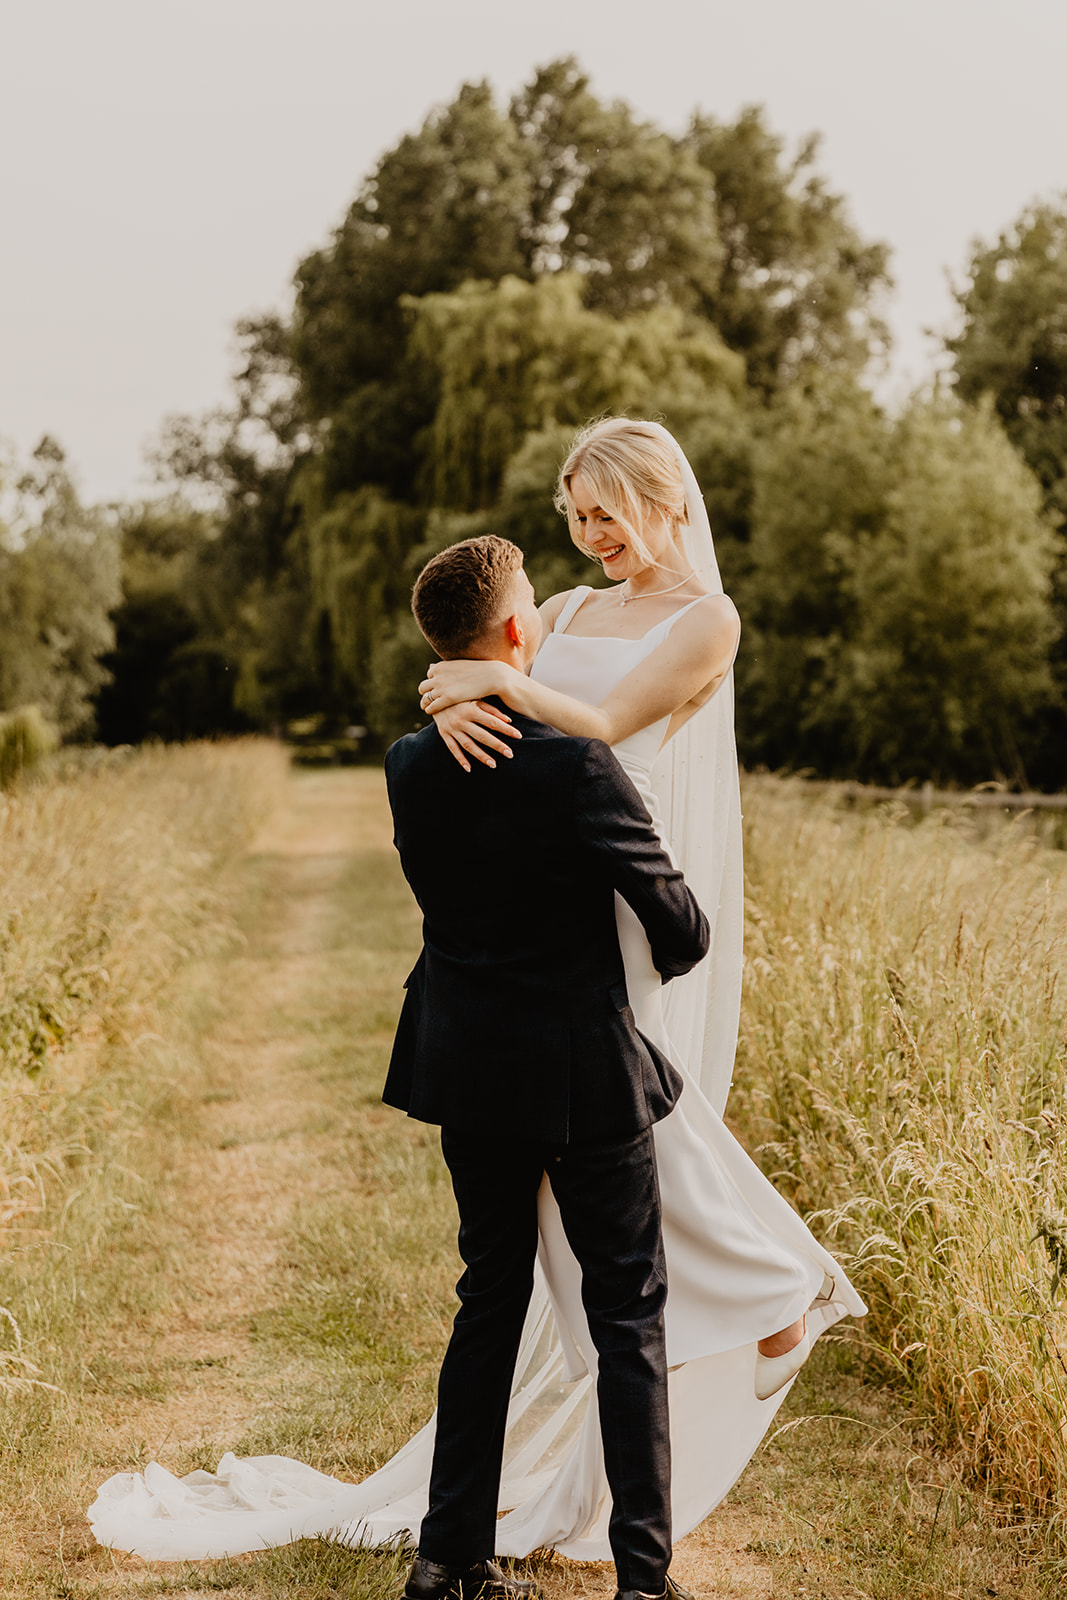 Bride and Groom golden hour photos at a Bury Manor Barn Wedding in Sussex. Photographer OliveJoy Photography.